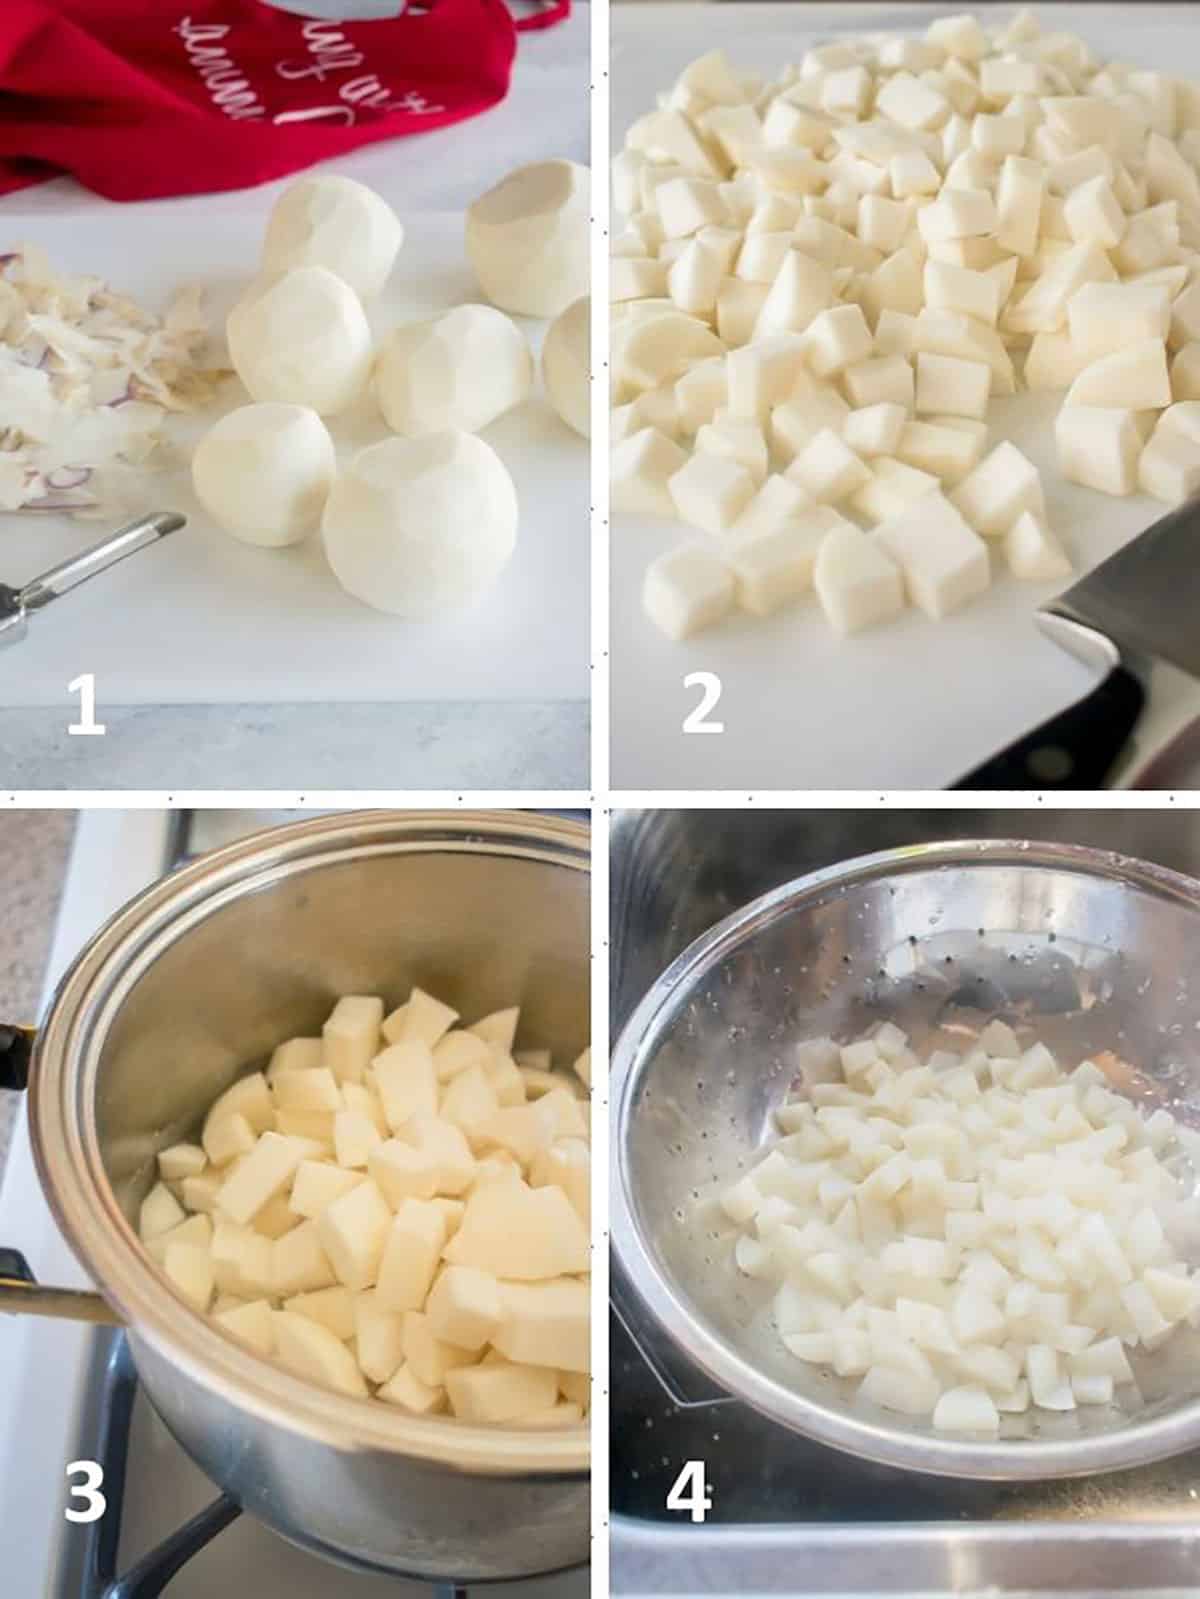 peeled turnips, cubed turnips, cubed turnips in pot, boiled turnips in drainer